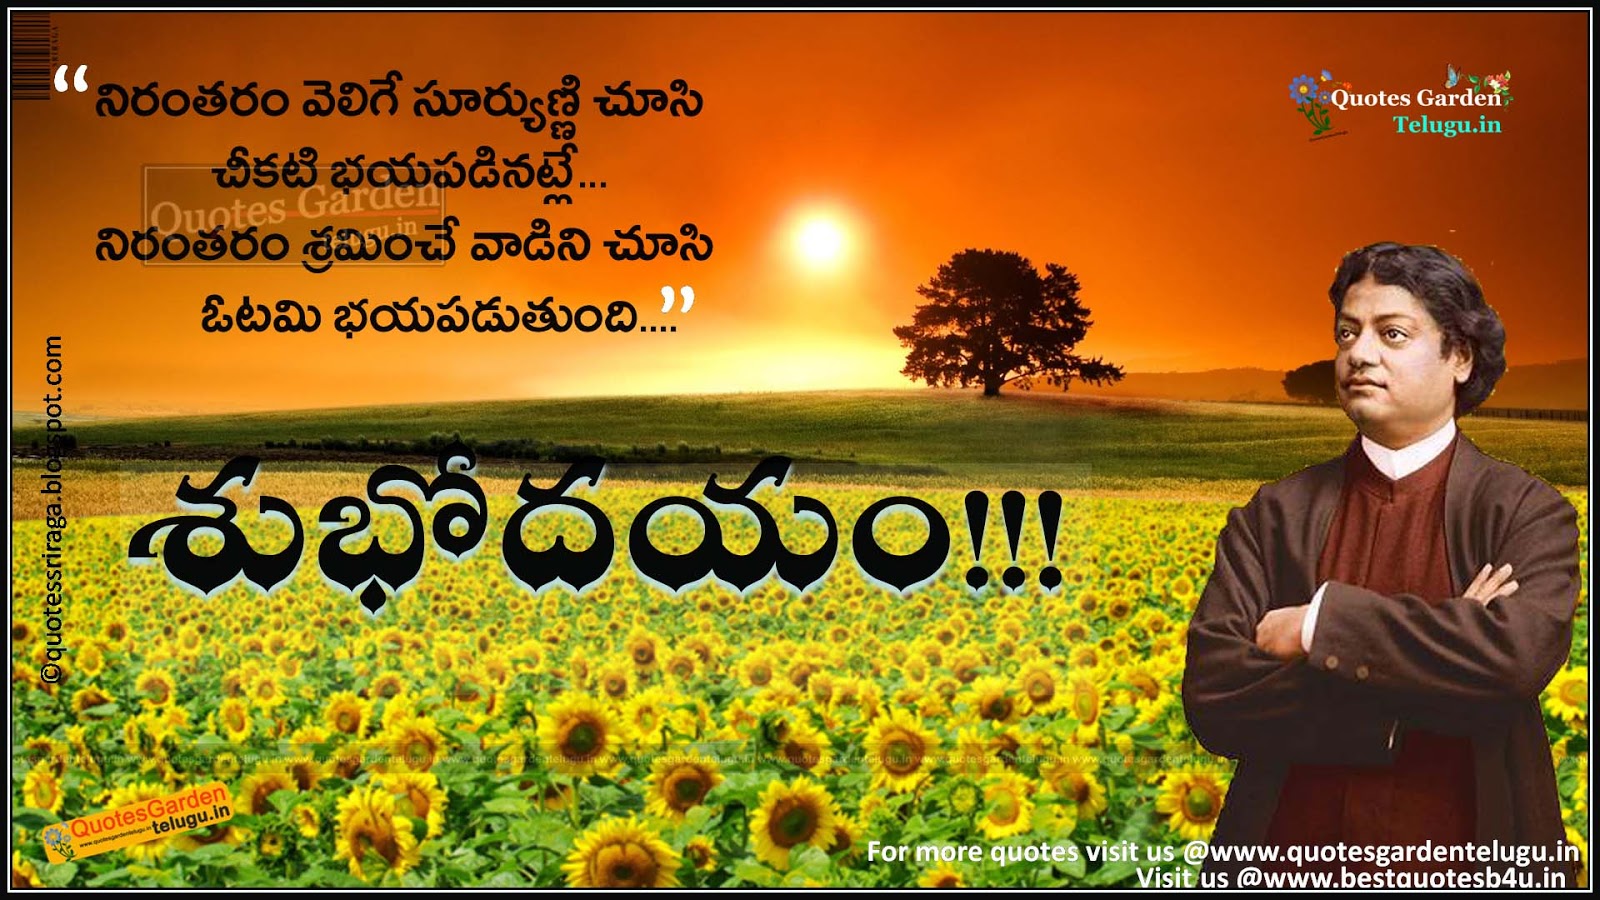 Amazing Good Morning Images With Bible Quotes In Telugu of the decade The ultimate guide 